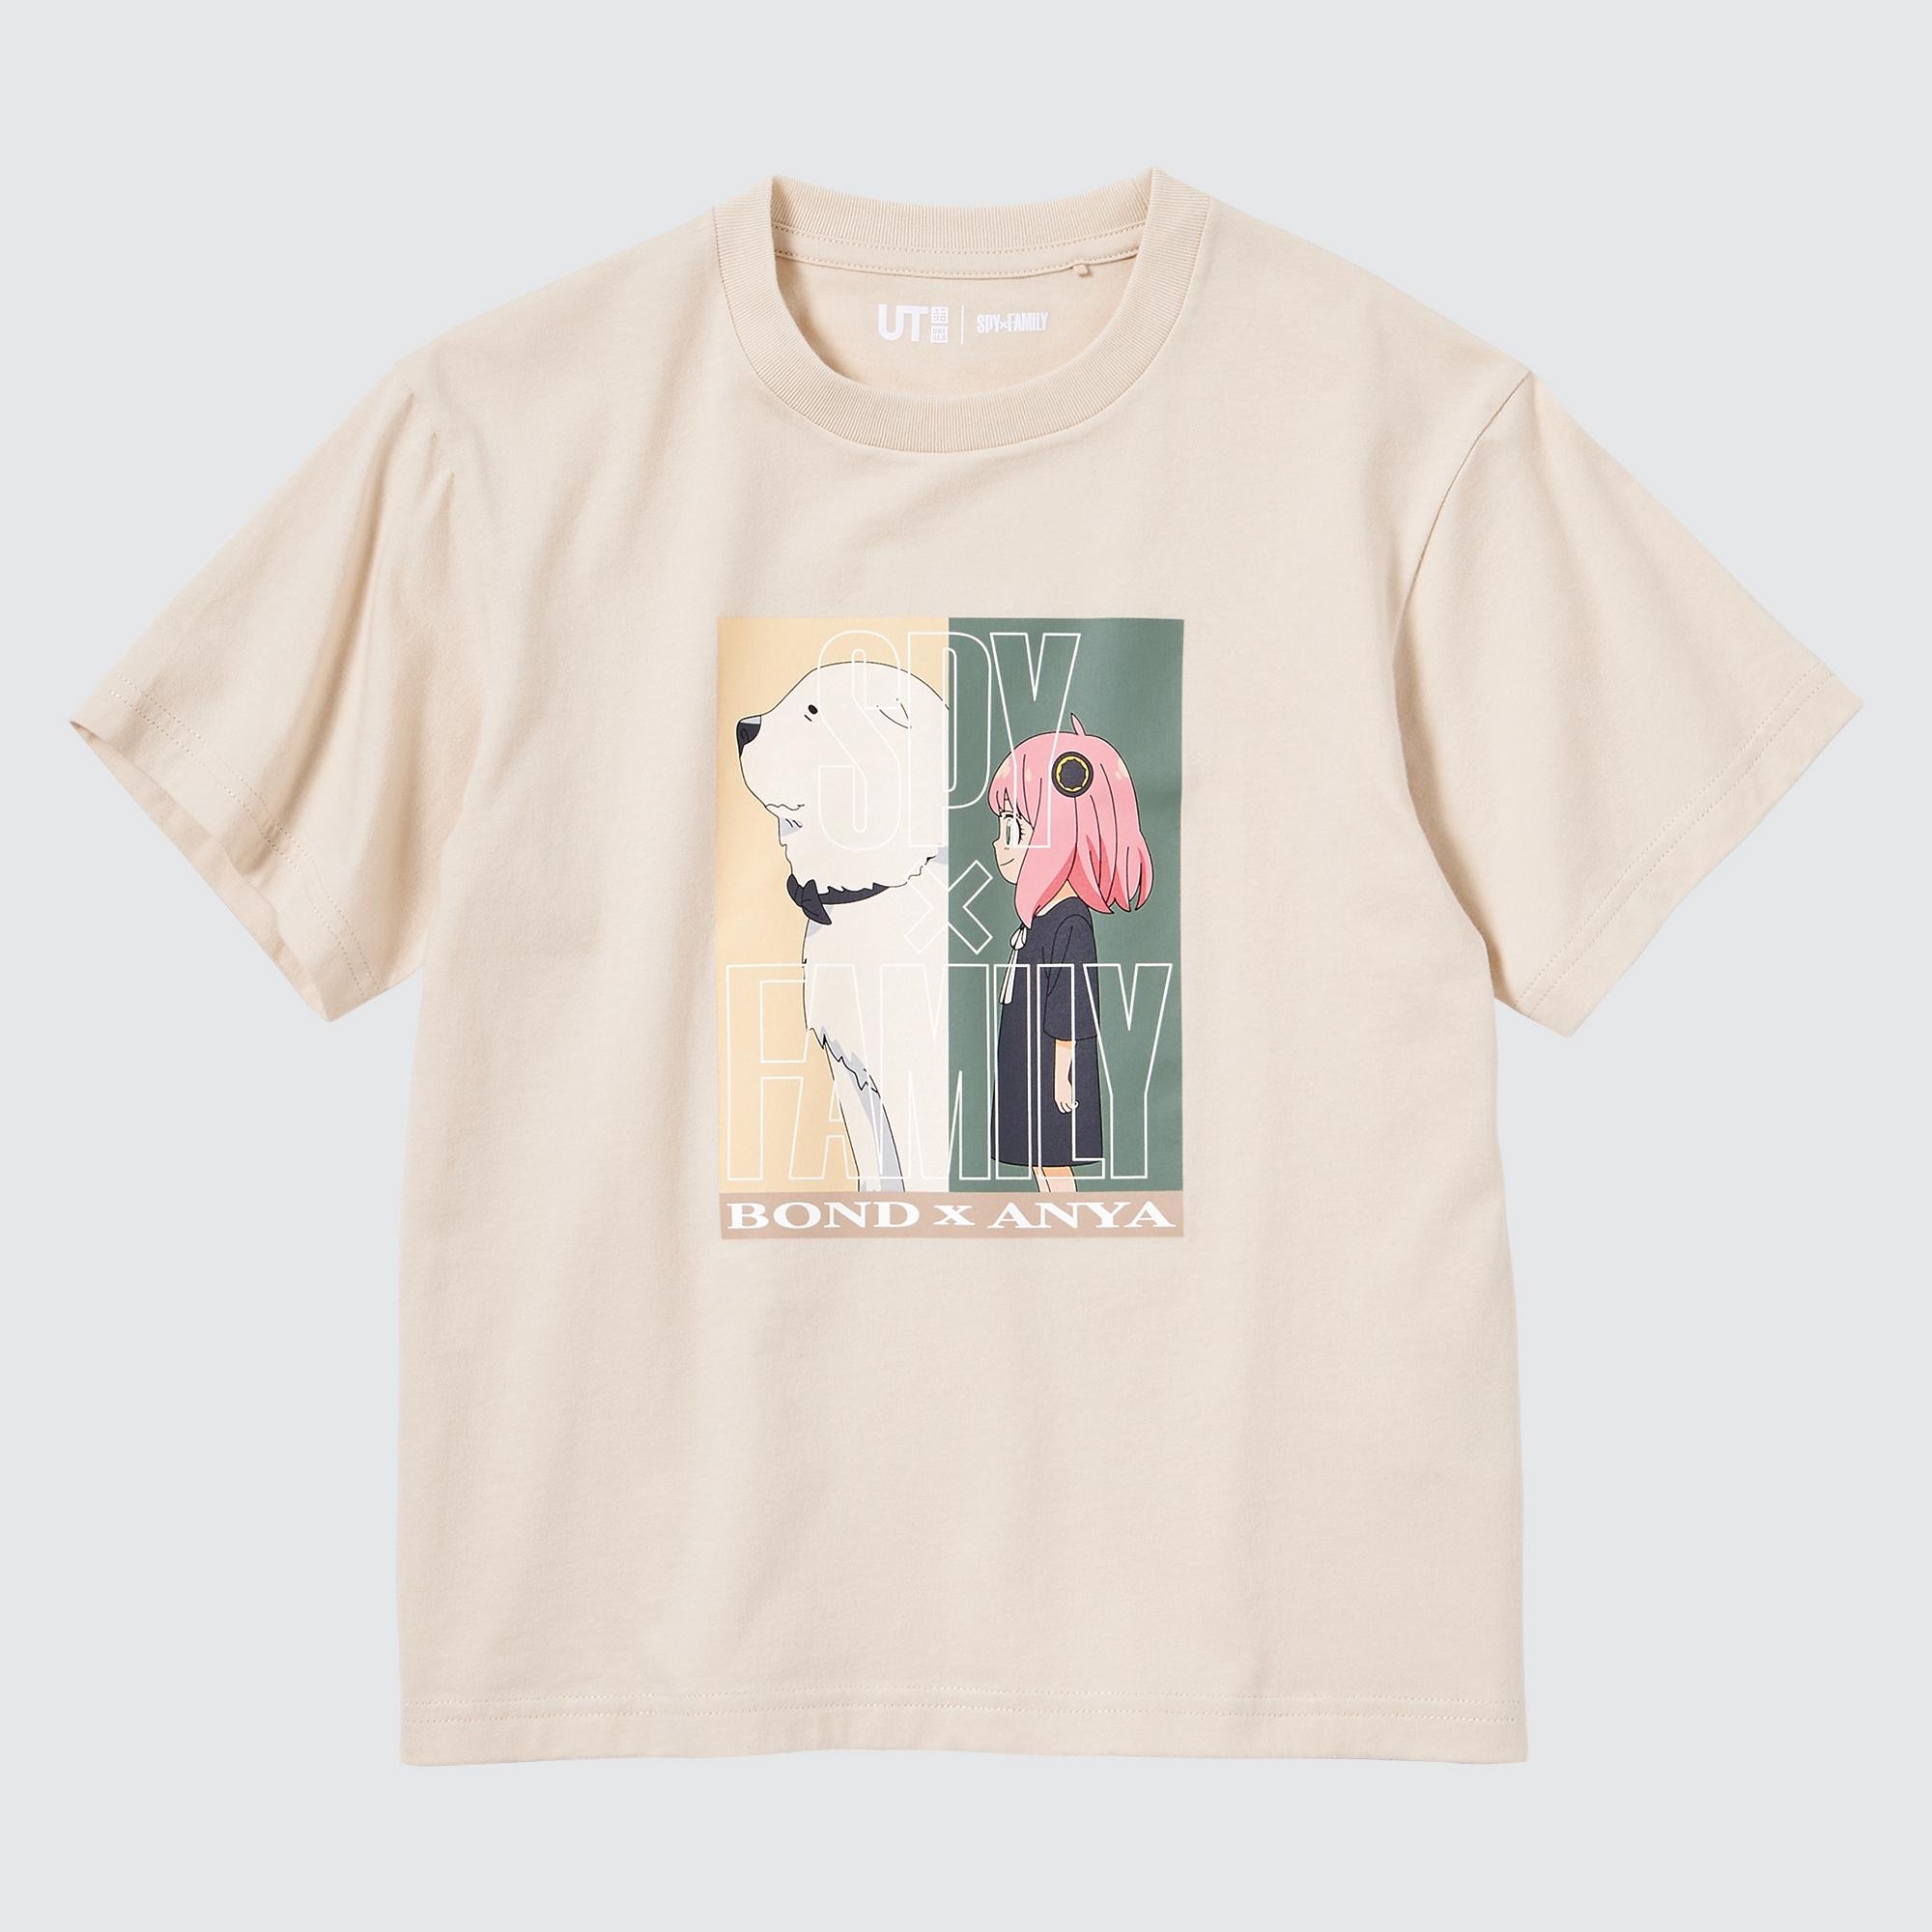 New UNIQLO SPY x FAMILY tshirt collection coming   rSpyxFamily